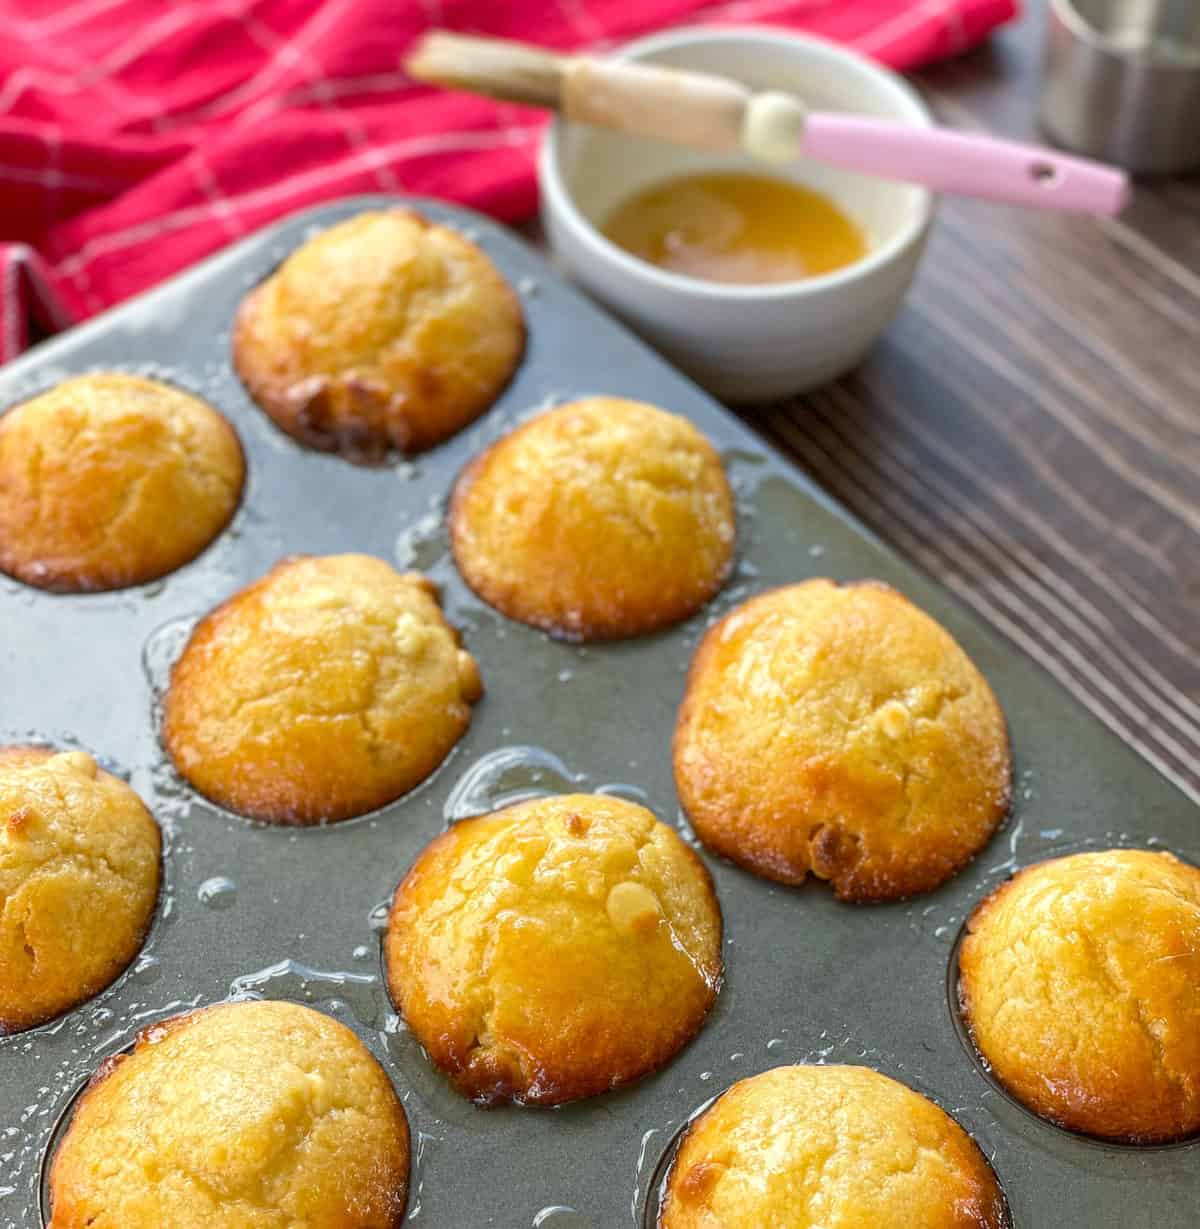 Muffin tray with freshly baked passionfruit muffins smothered in syrup